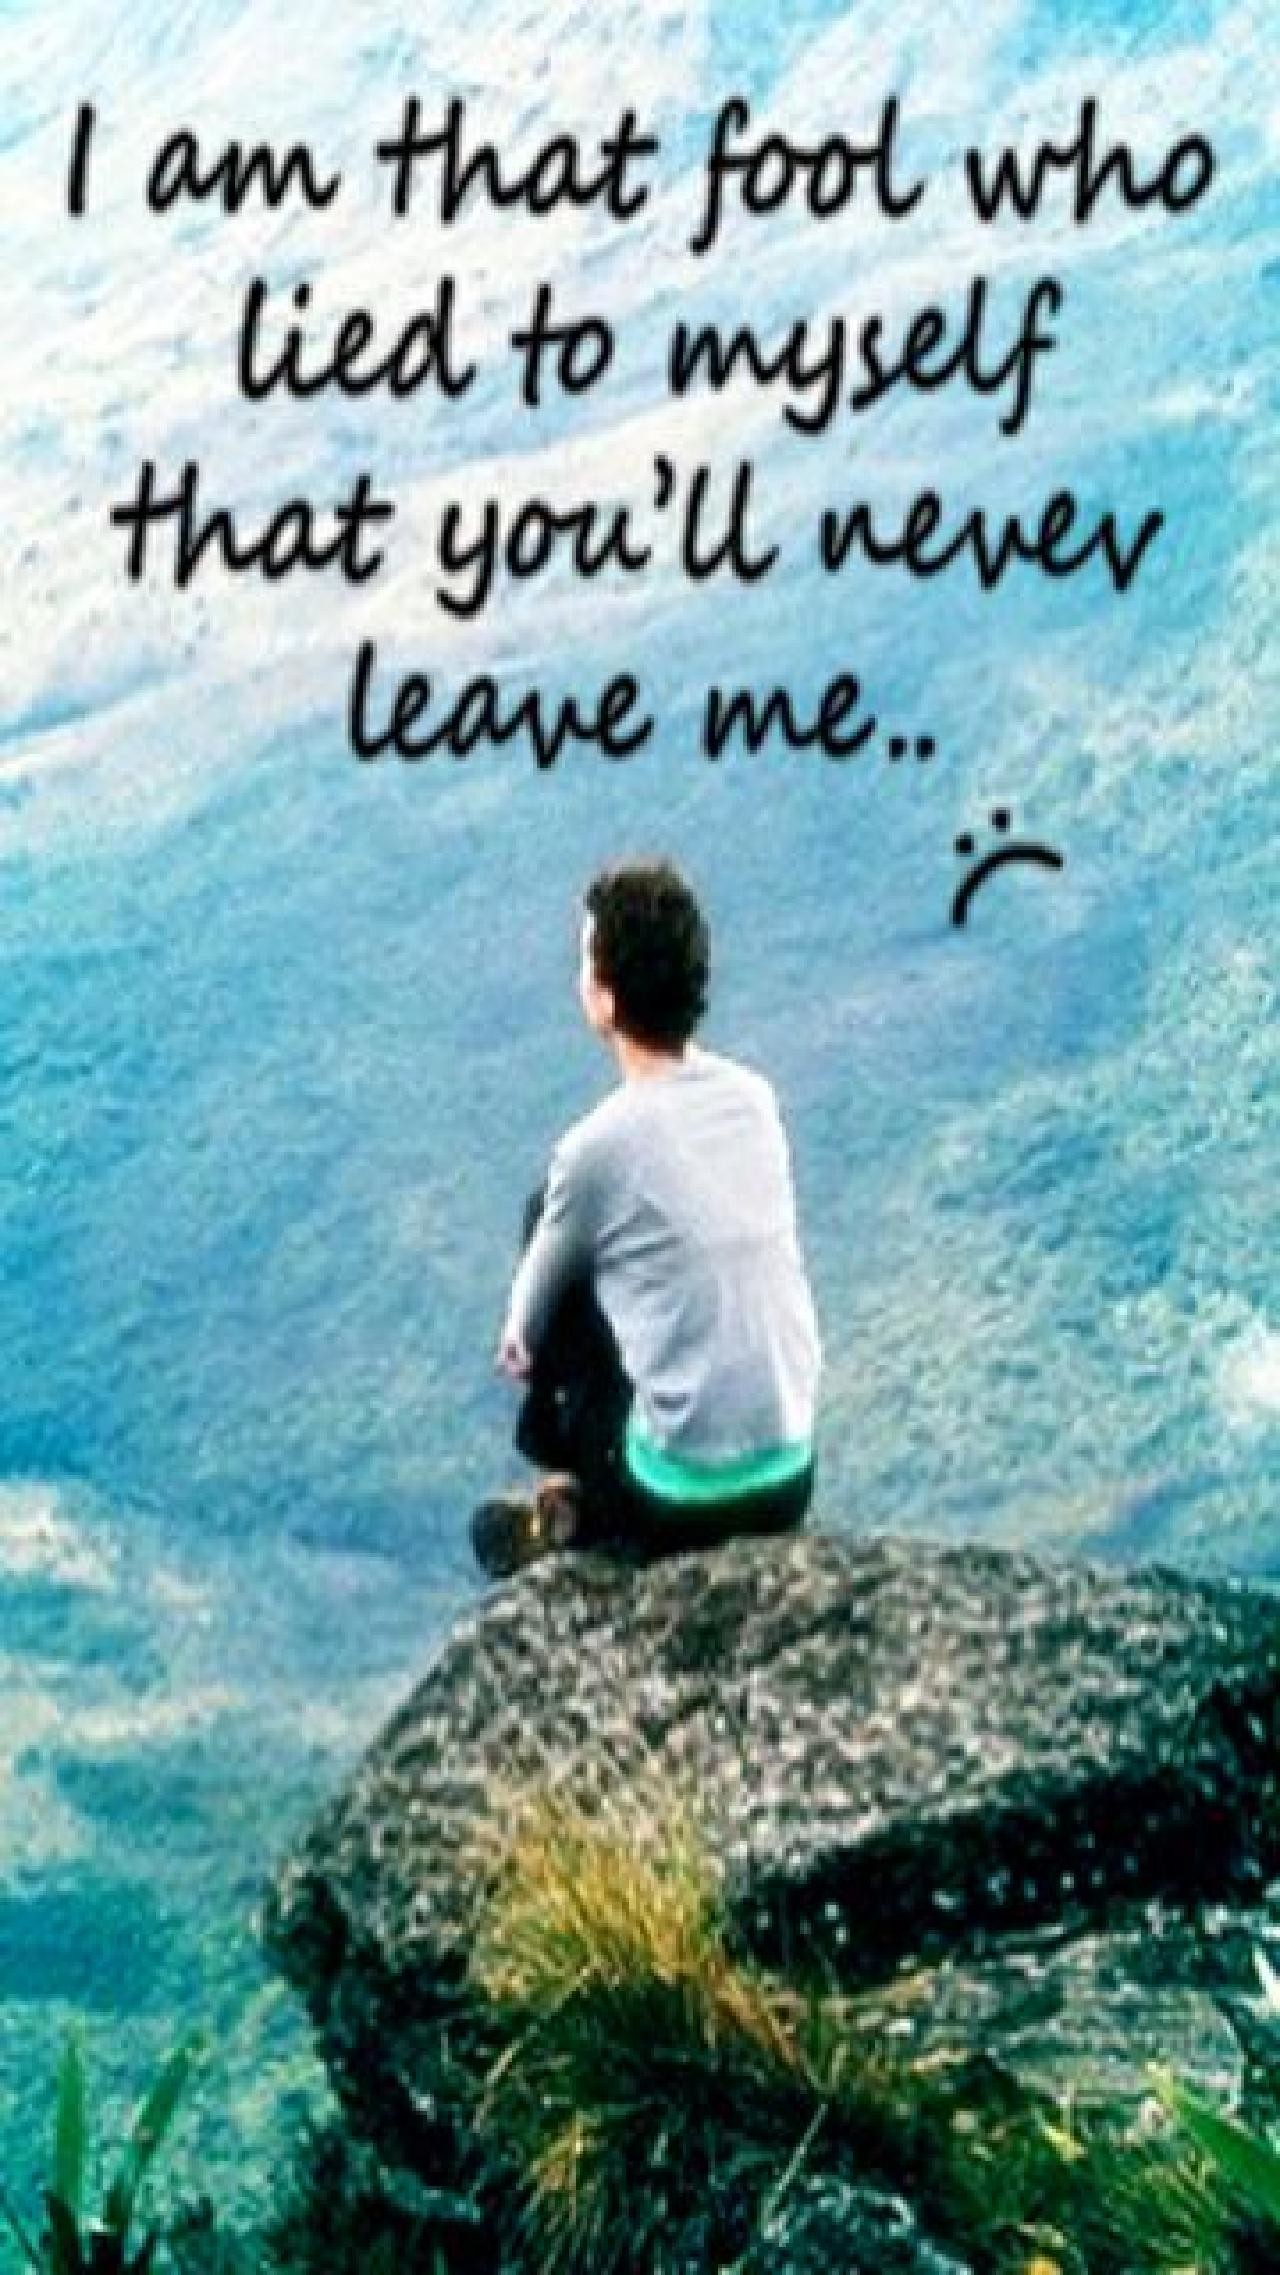 leave me alone wallpaper,text,adaptation,happy,friendship,water